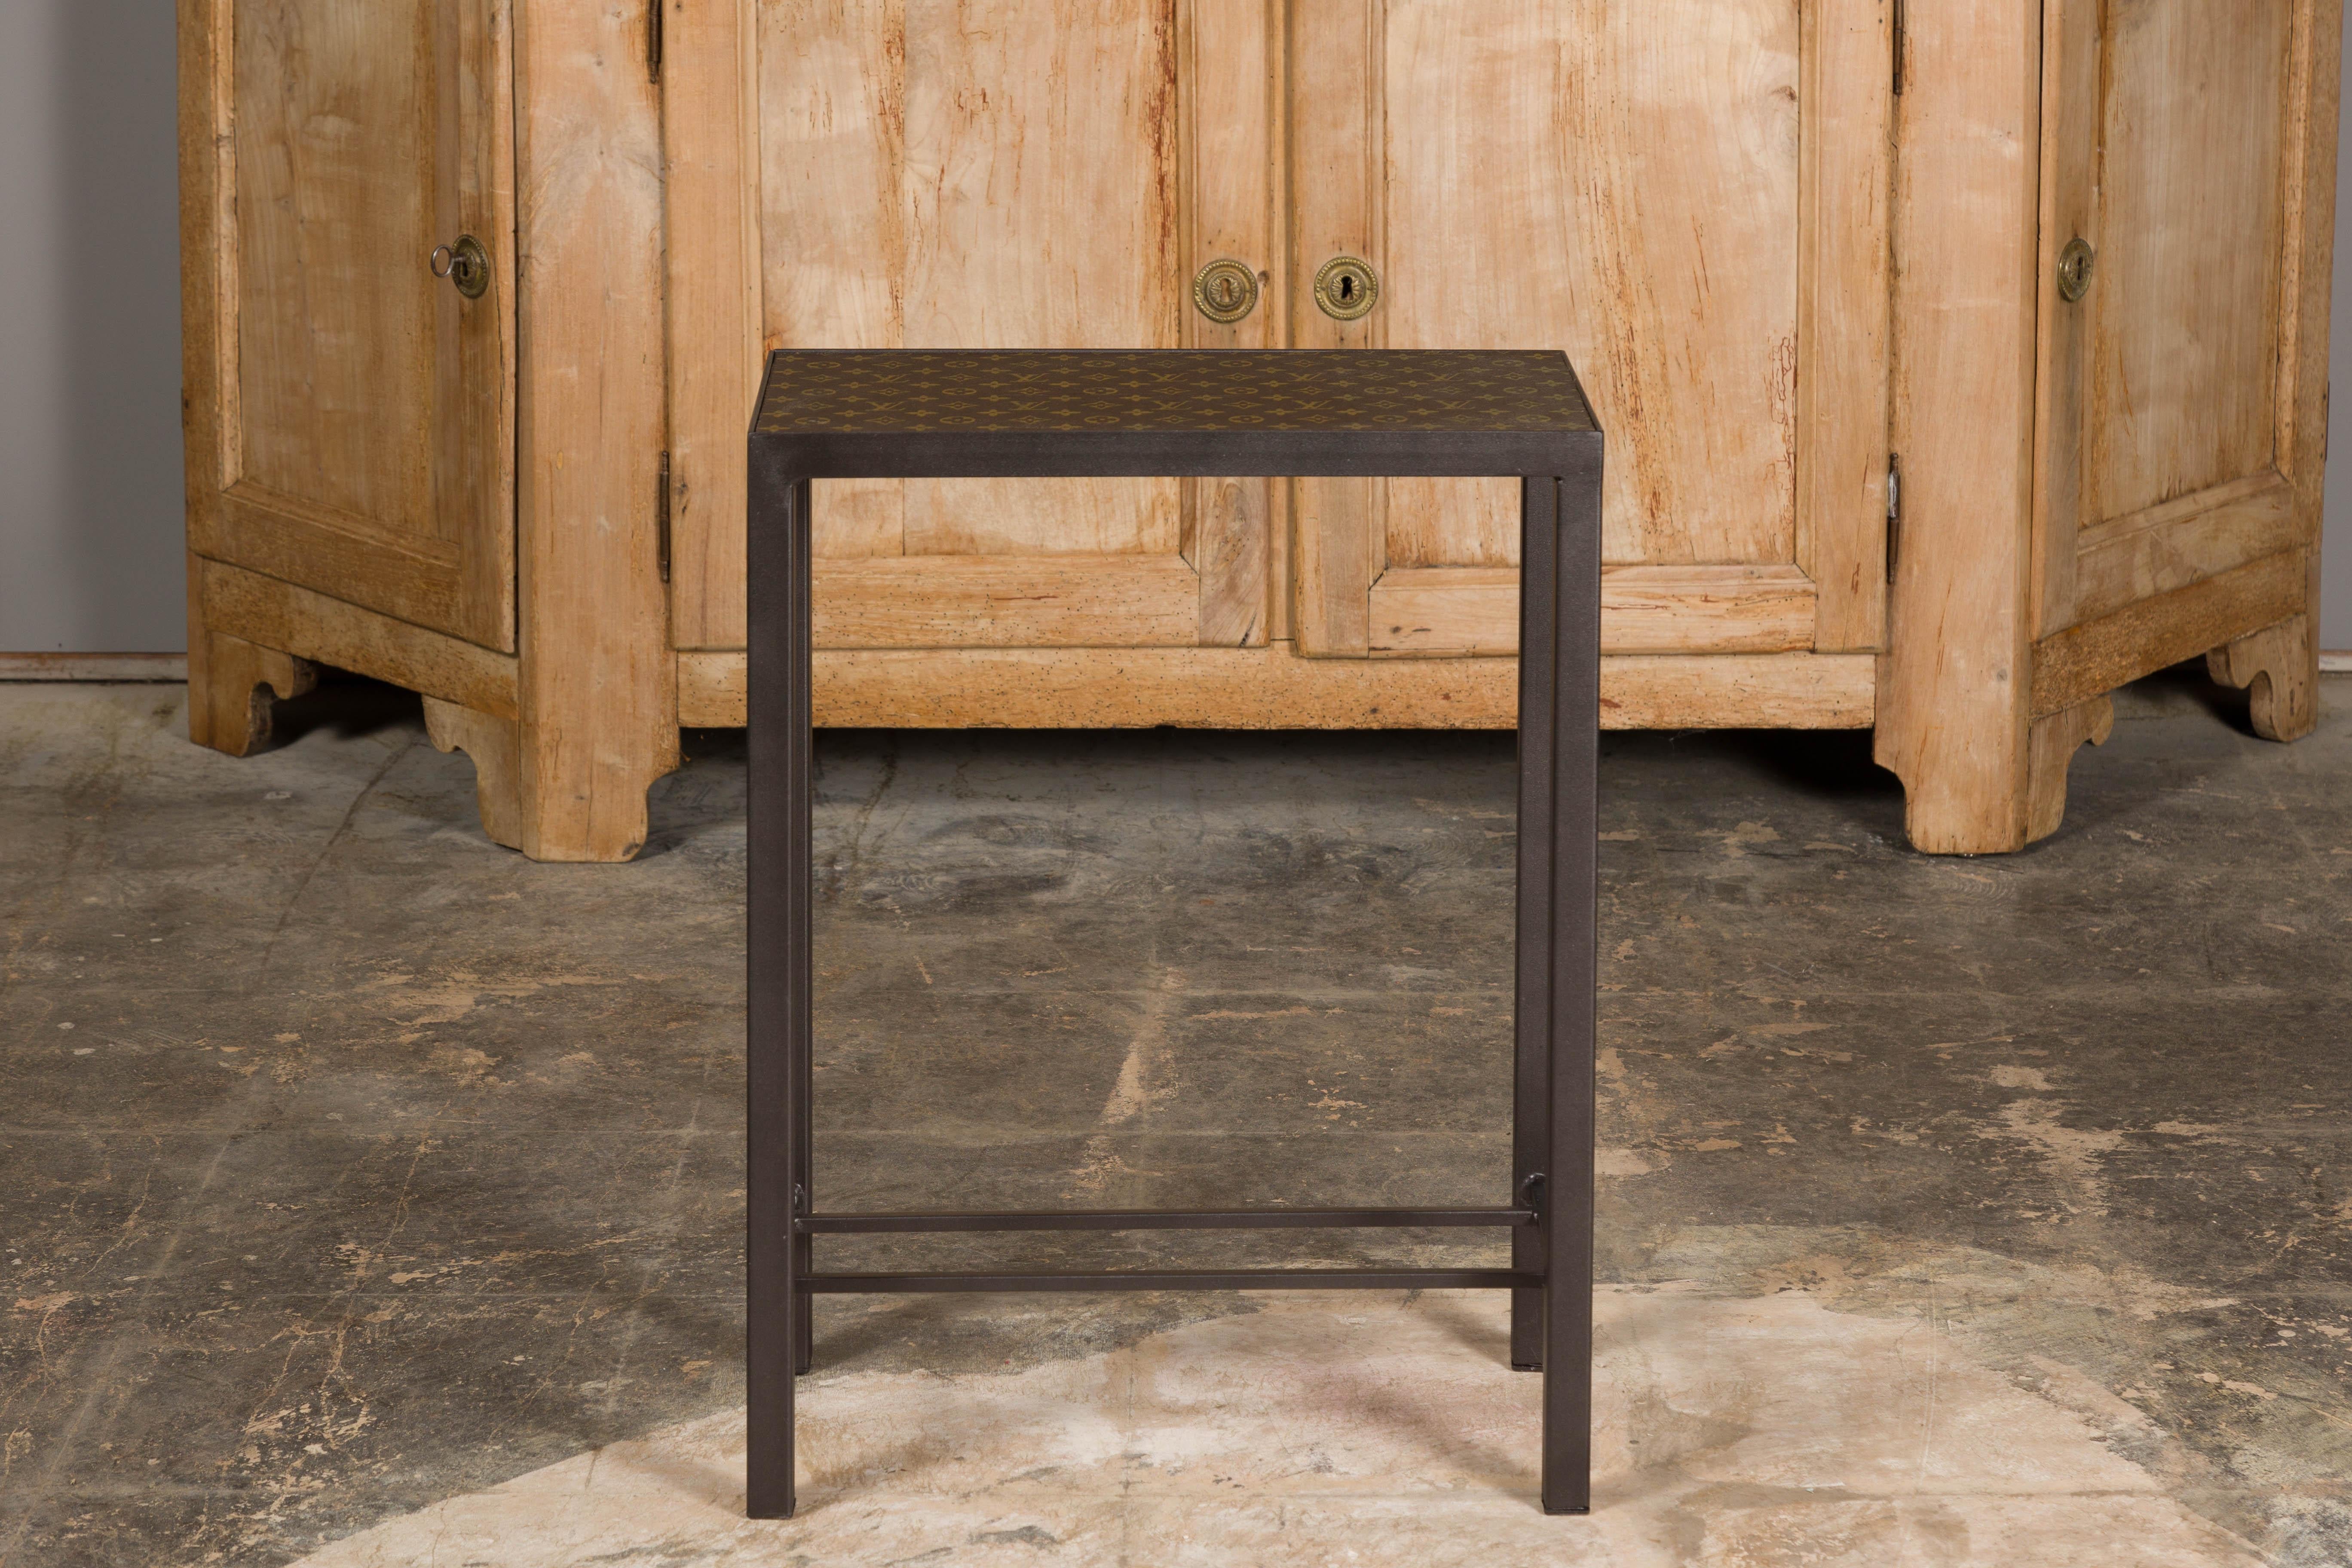 A small side table with Louis Vuitton leather top mounted on a custom metal base with cross stretchers. Immerse yourself in the epitome of luxury and craftsmanship with this stunning small side table, featuring a top adorned in iconic Louis Vuitton